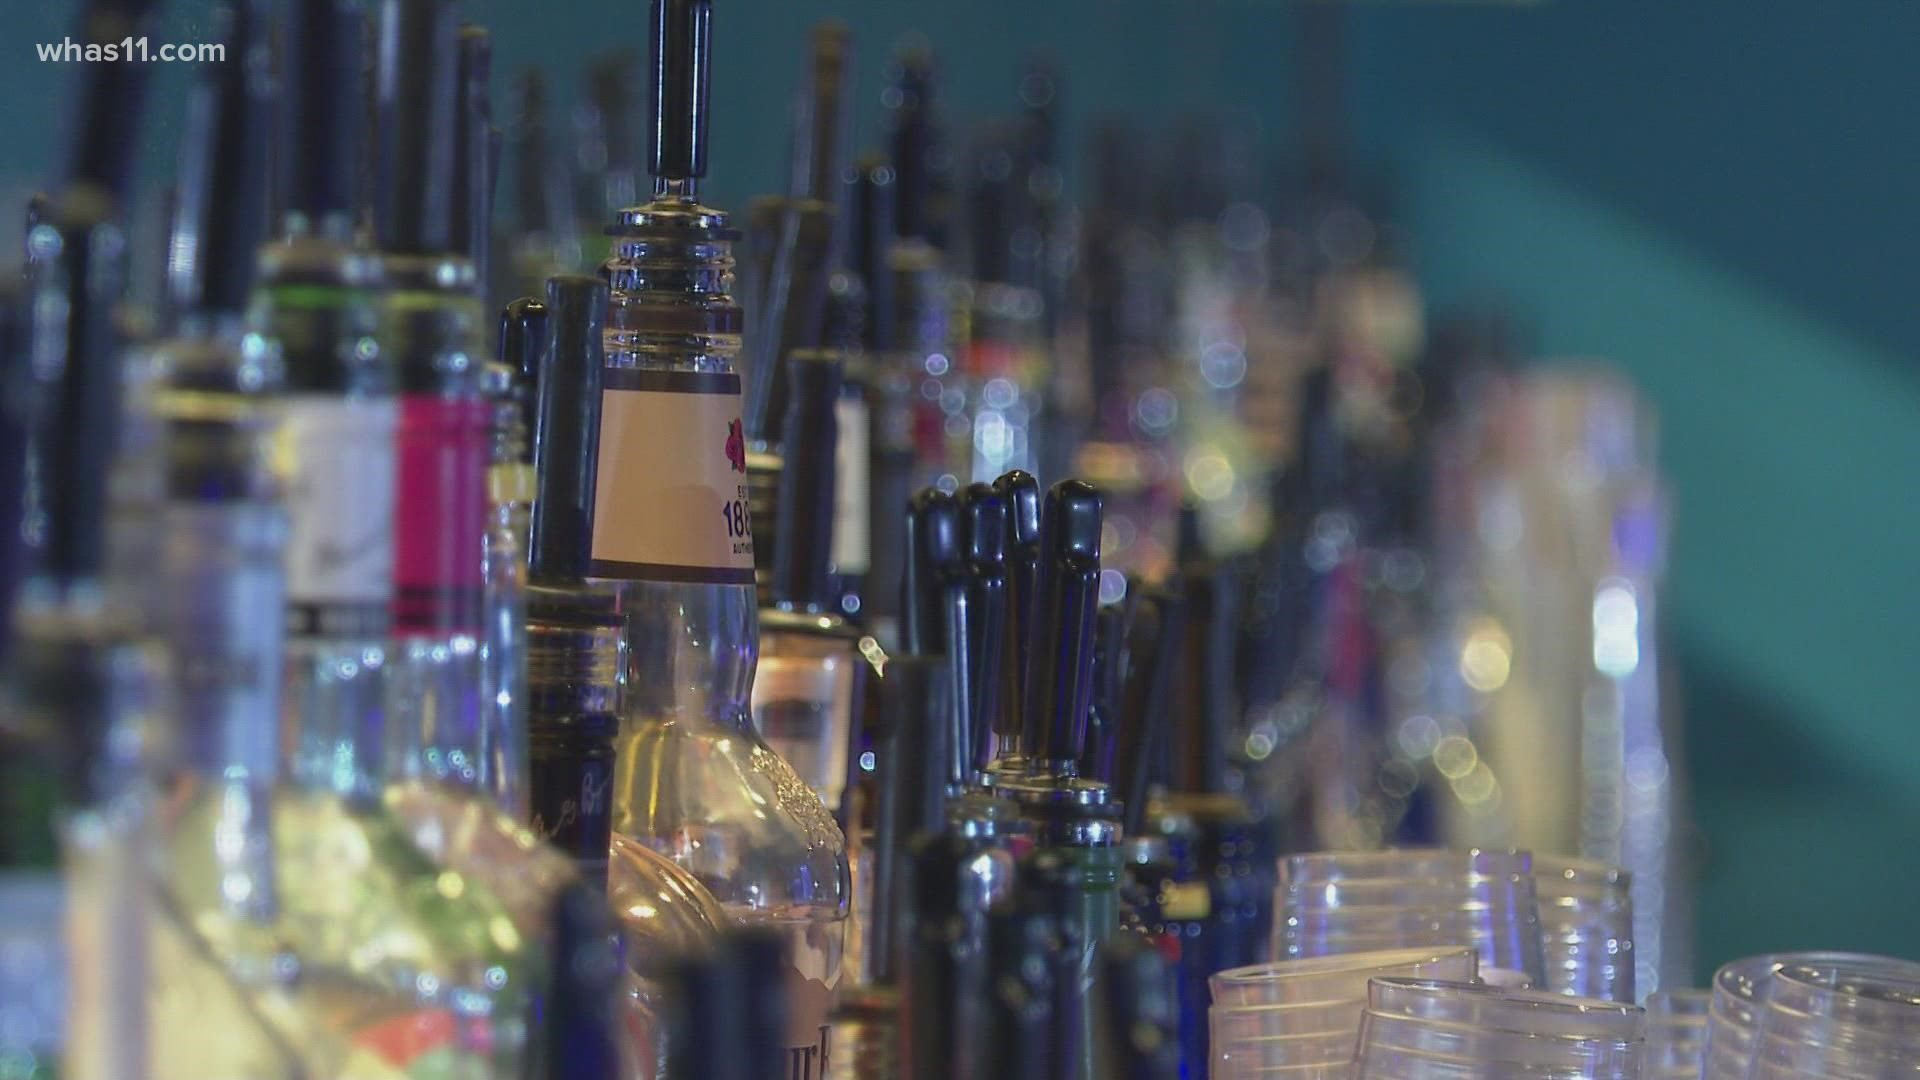 In an effort to curb violence, council member Cassie Chambers Armstrong is proposing an ordinance to temporarily change liquor license hours in Louisville.